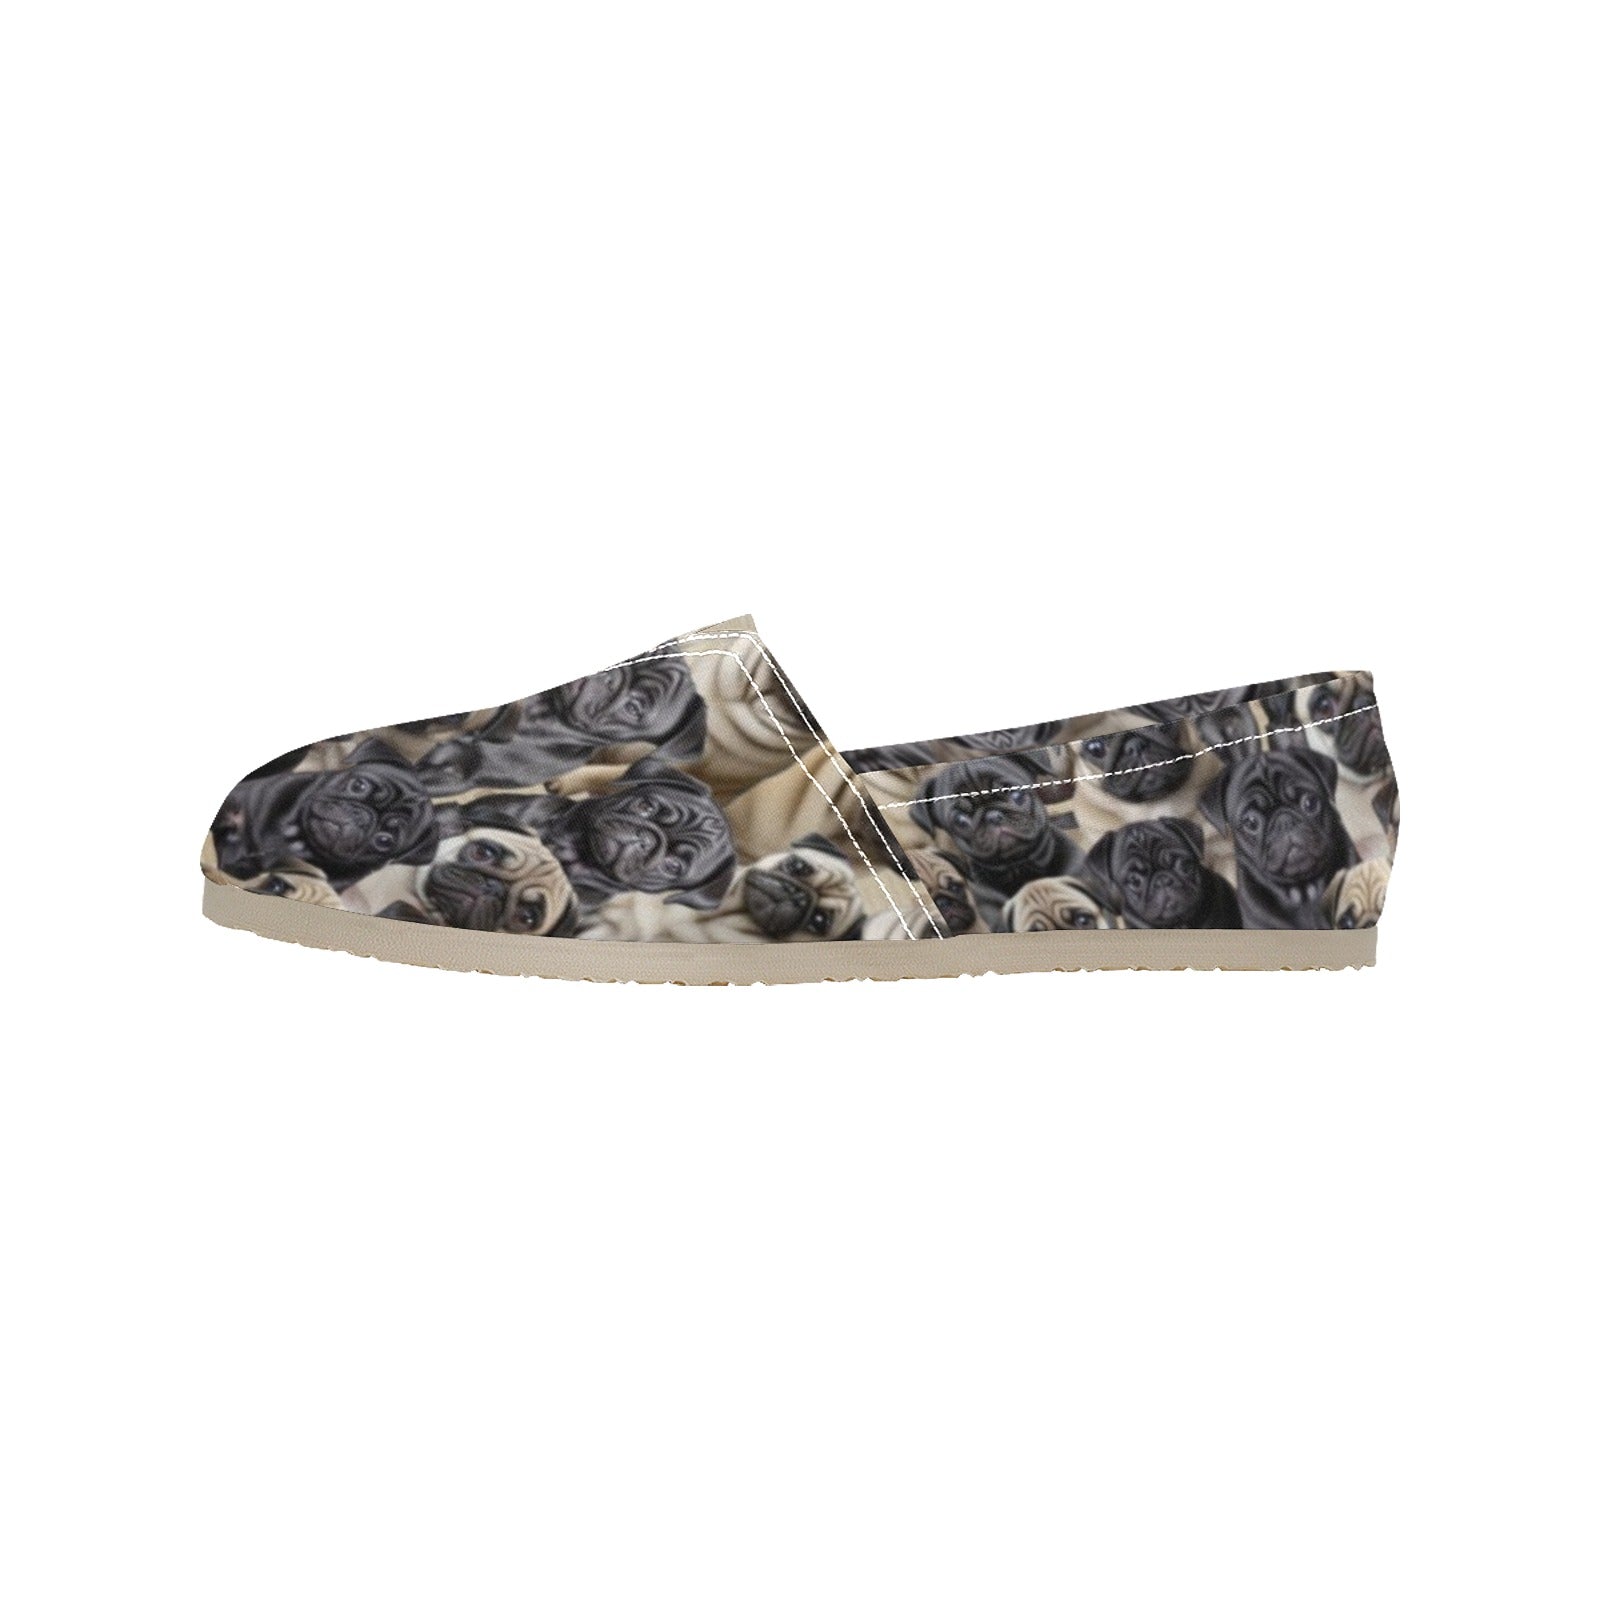 Pug - Casual Canvas Slip-on Shoes